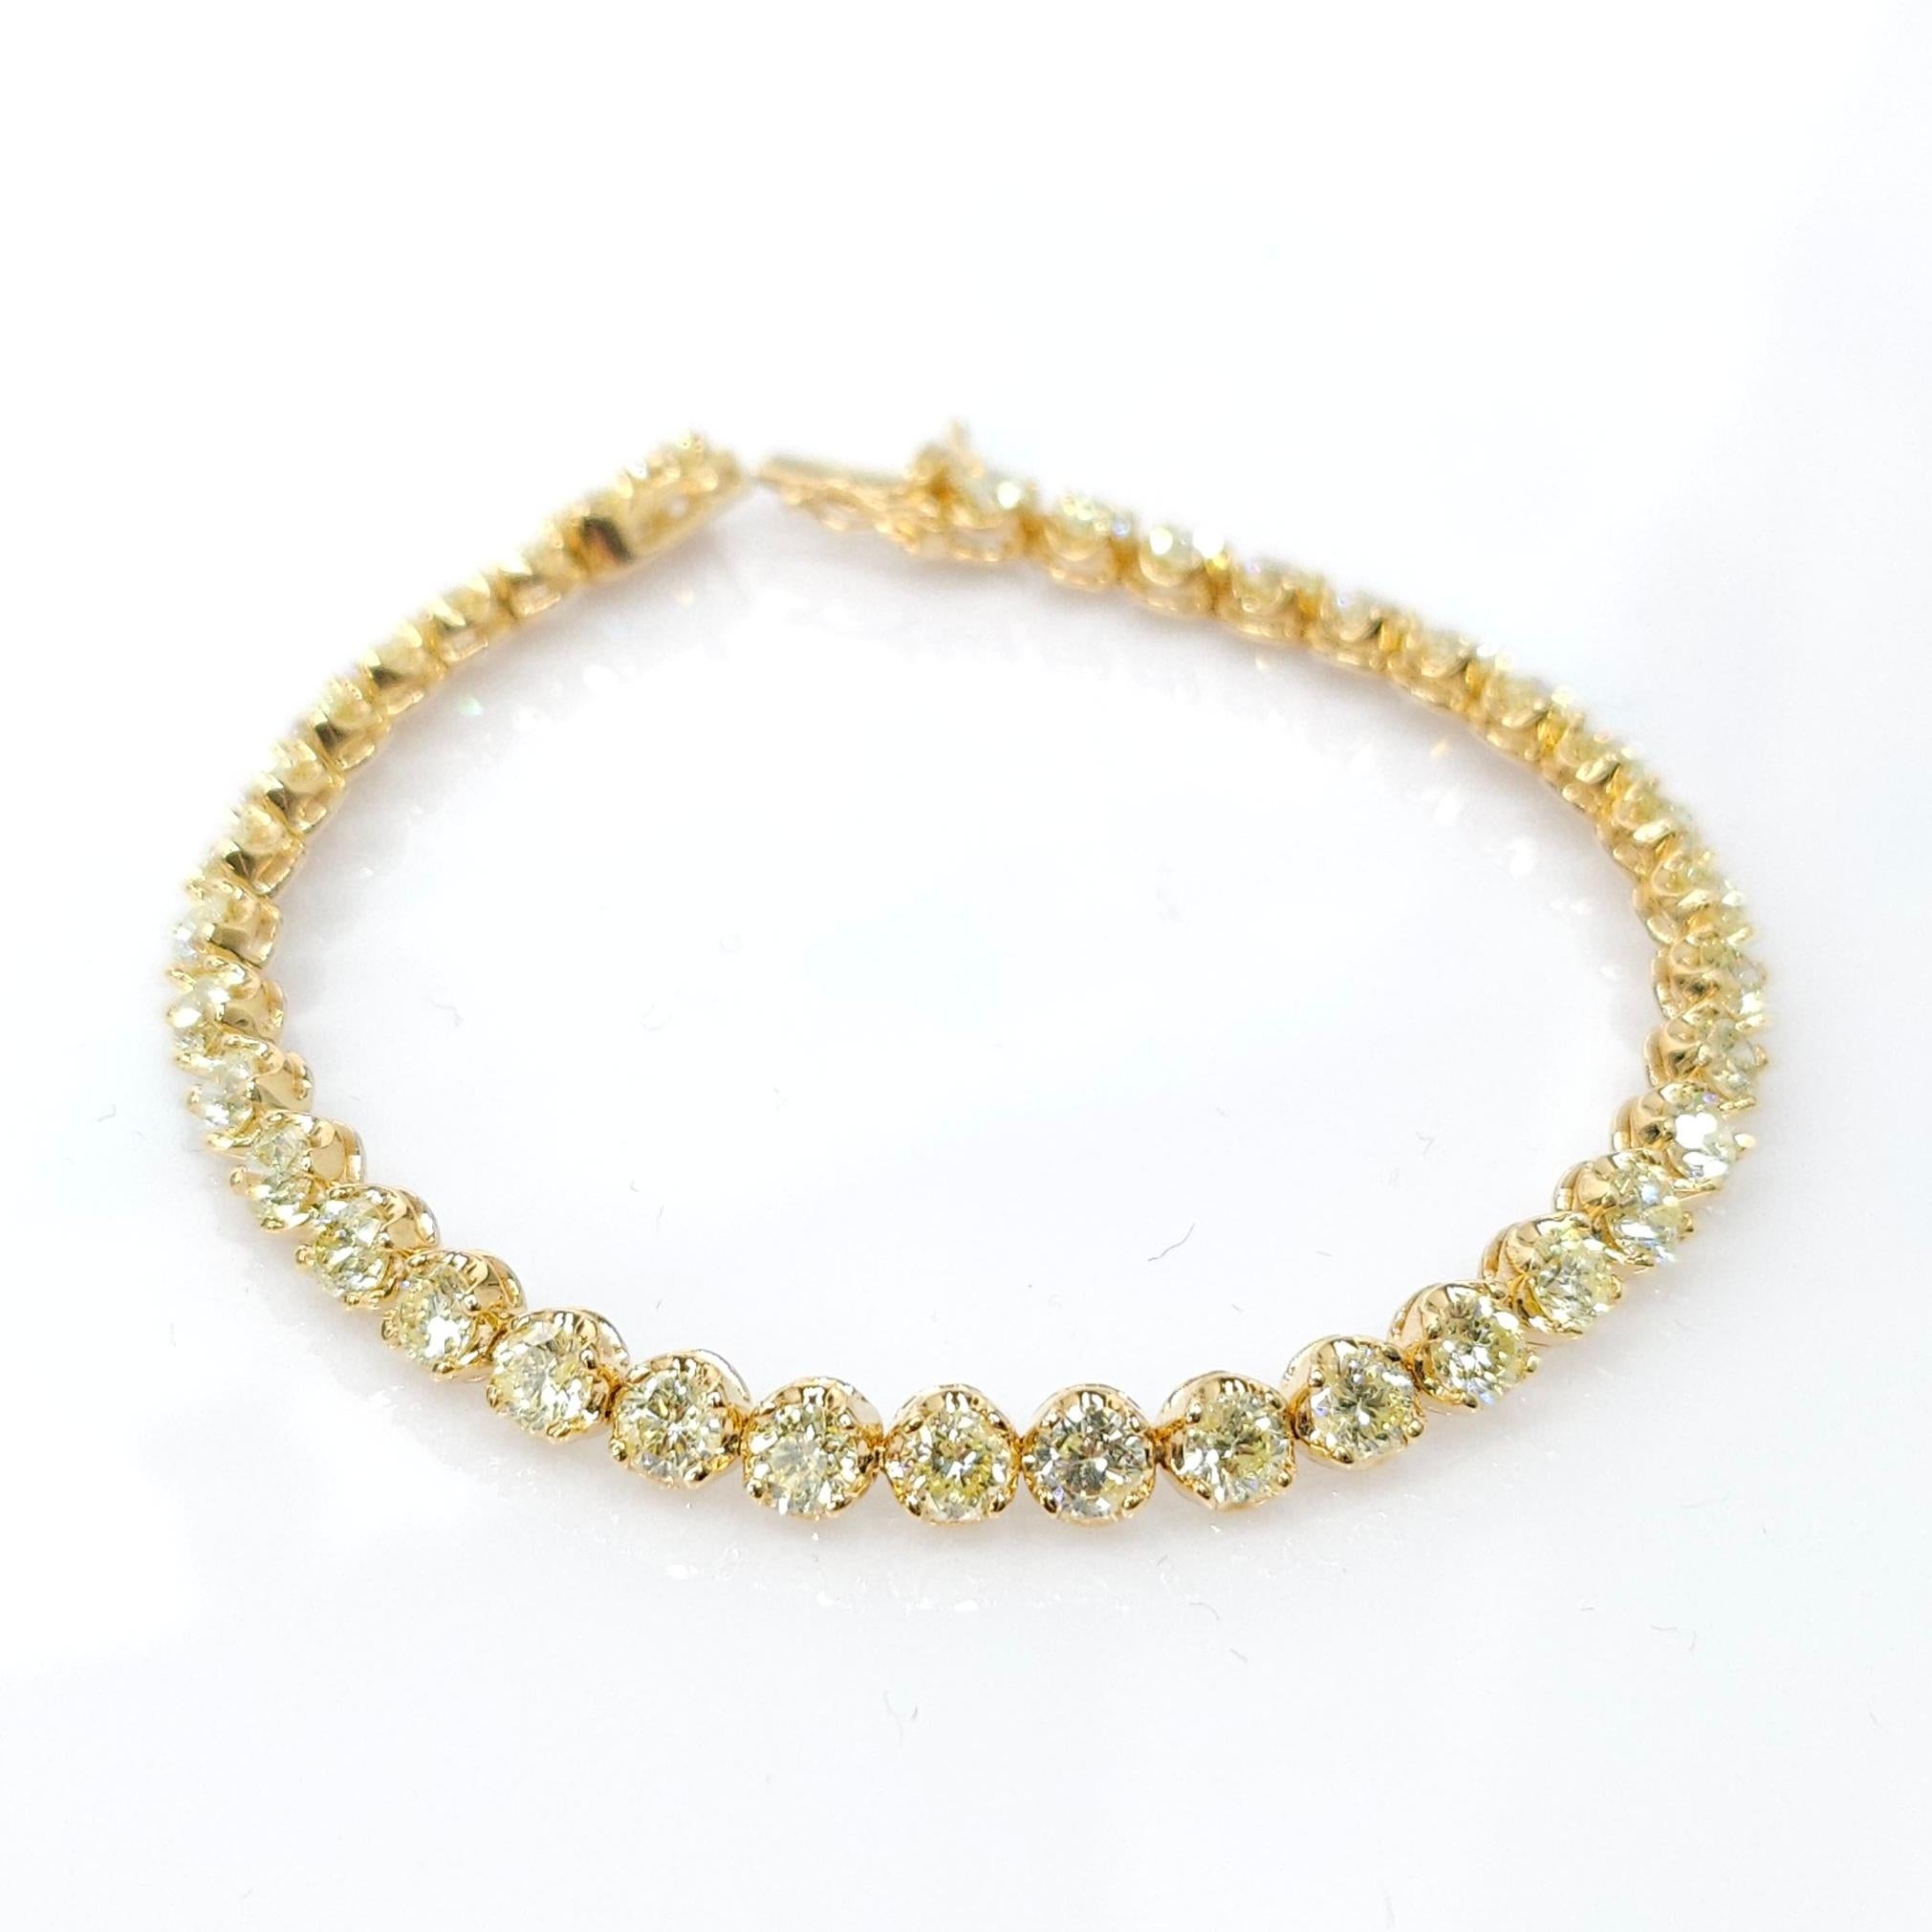 Elevate your jewelry collection with the exquisite beauty of this 6.56 Carat Total Round Diamond Tennis Bracelet in 18K Yellow Gold. This stunning piece is designed to captivate and dazzle with its innovative new design and impeccable